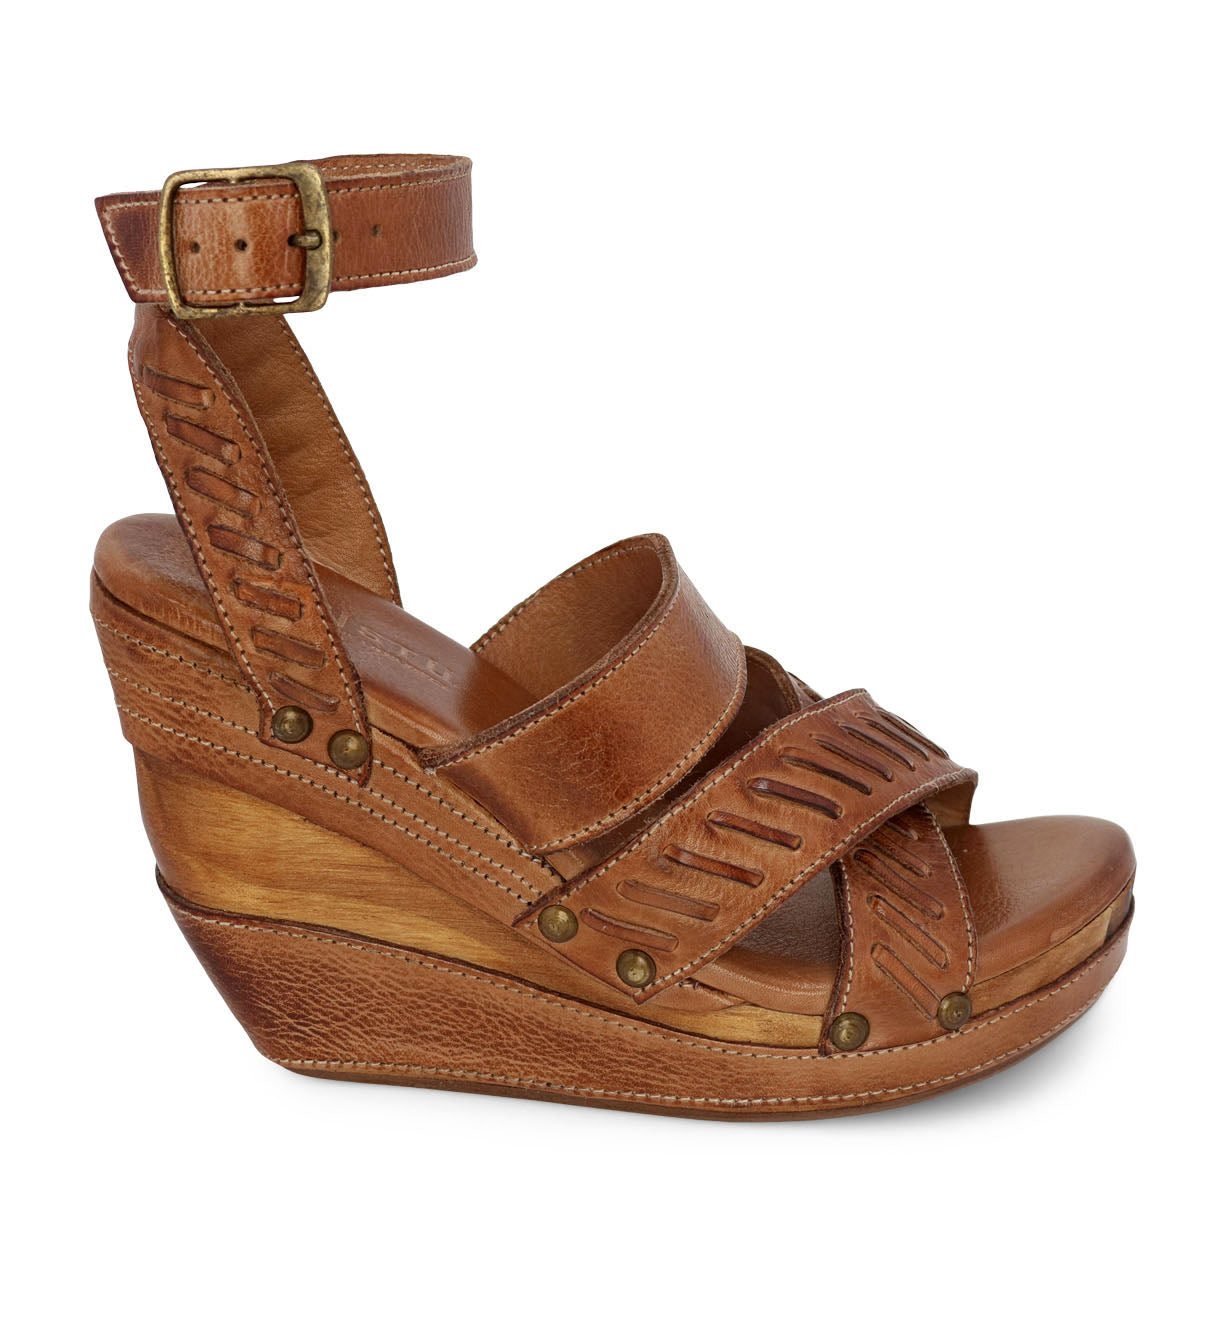 A women's tan Kaphie wedge sandal with straps and buckles by Bed Stu.